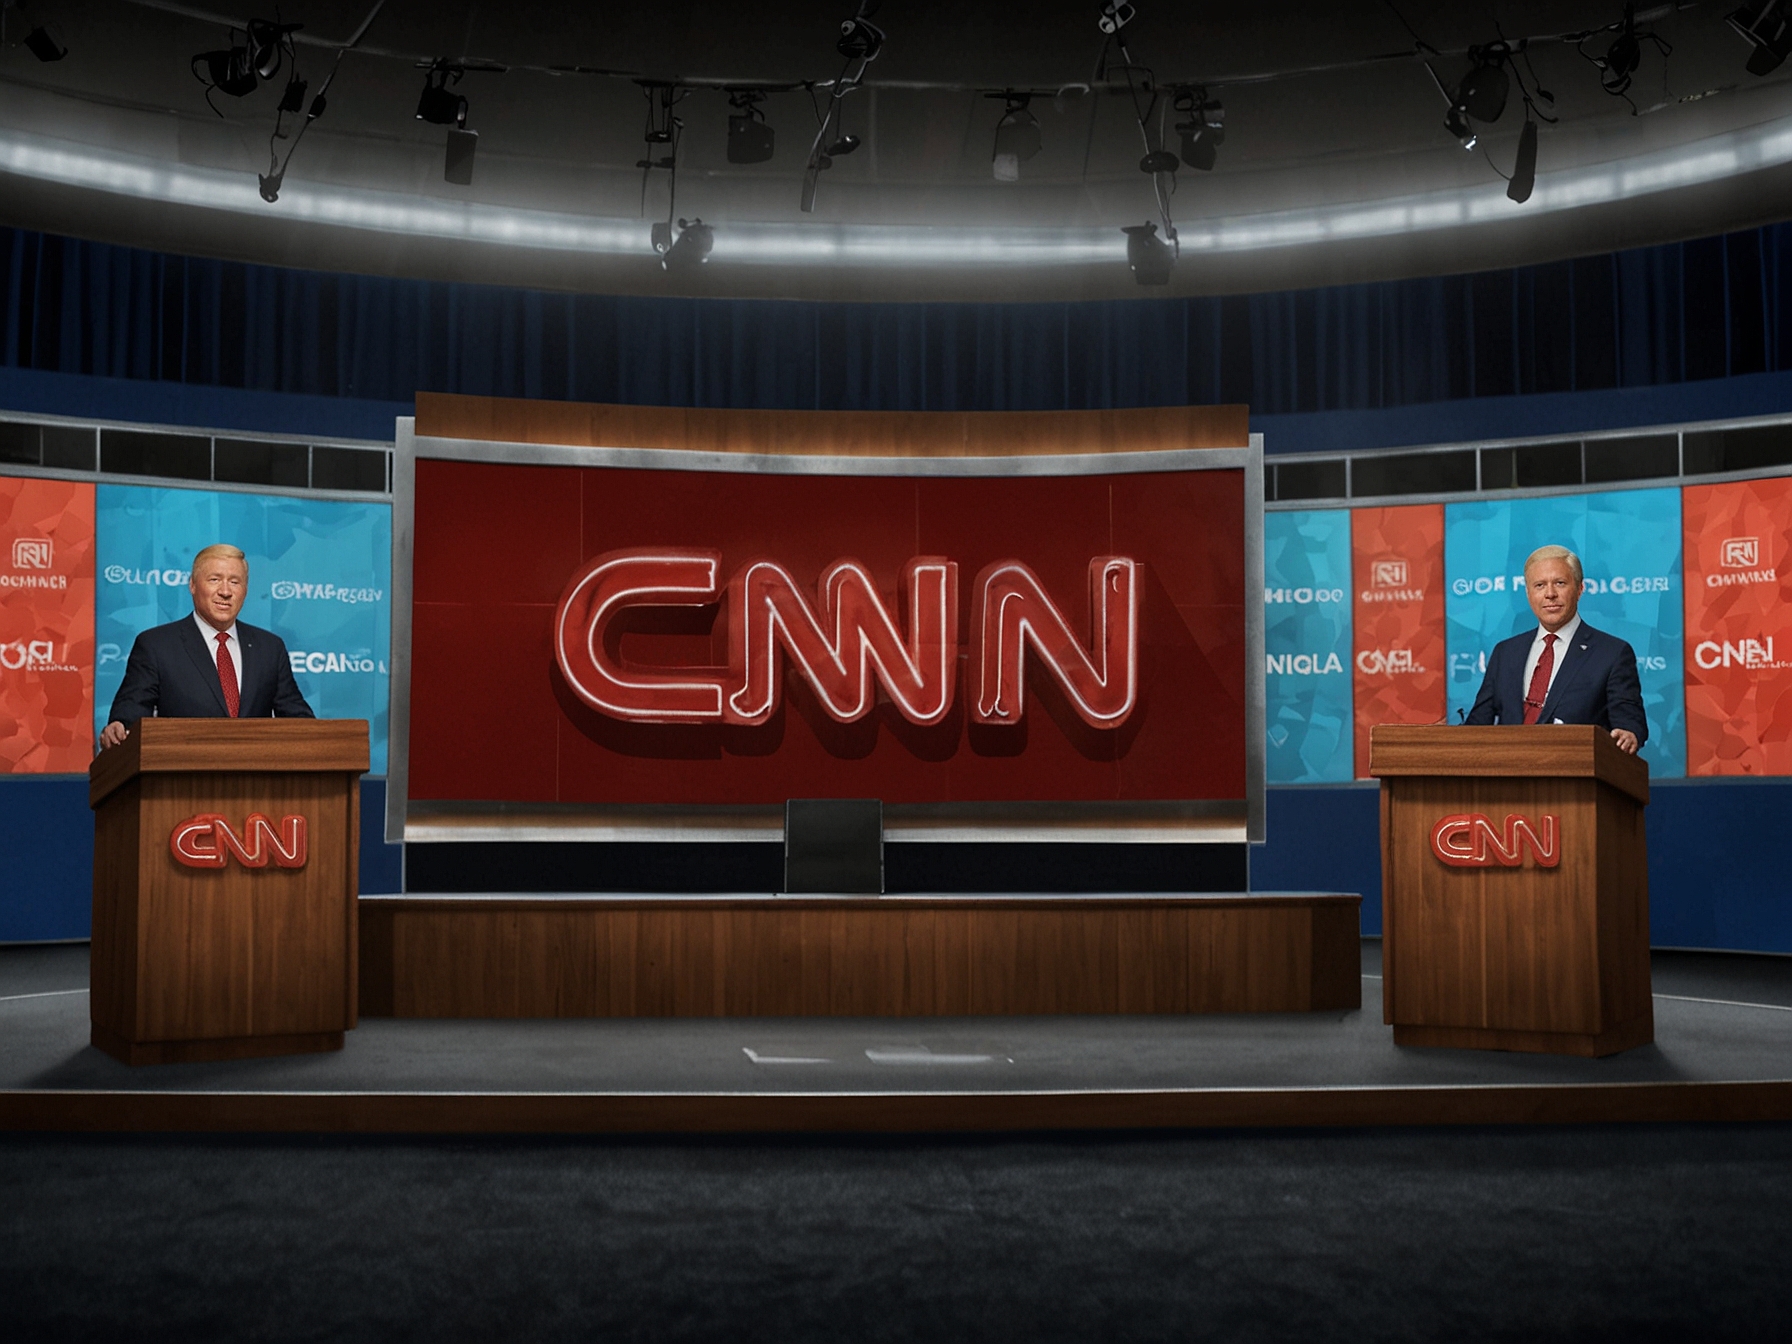 An image illustrating the CNN logo alongside a podium, representing the significance and competitive nature of qualifying for debates hosted by major news networks.